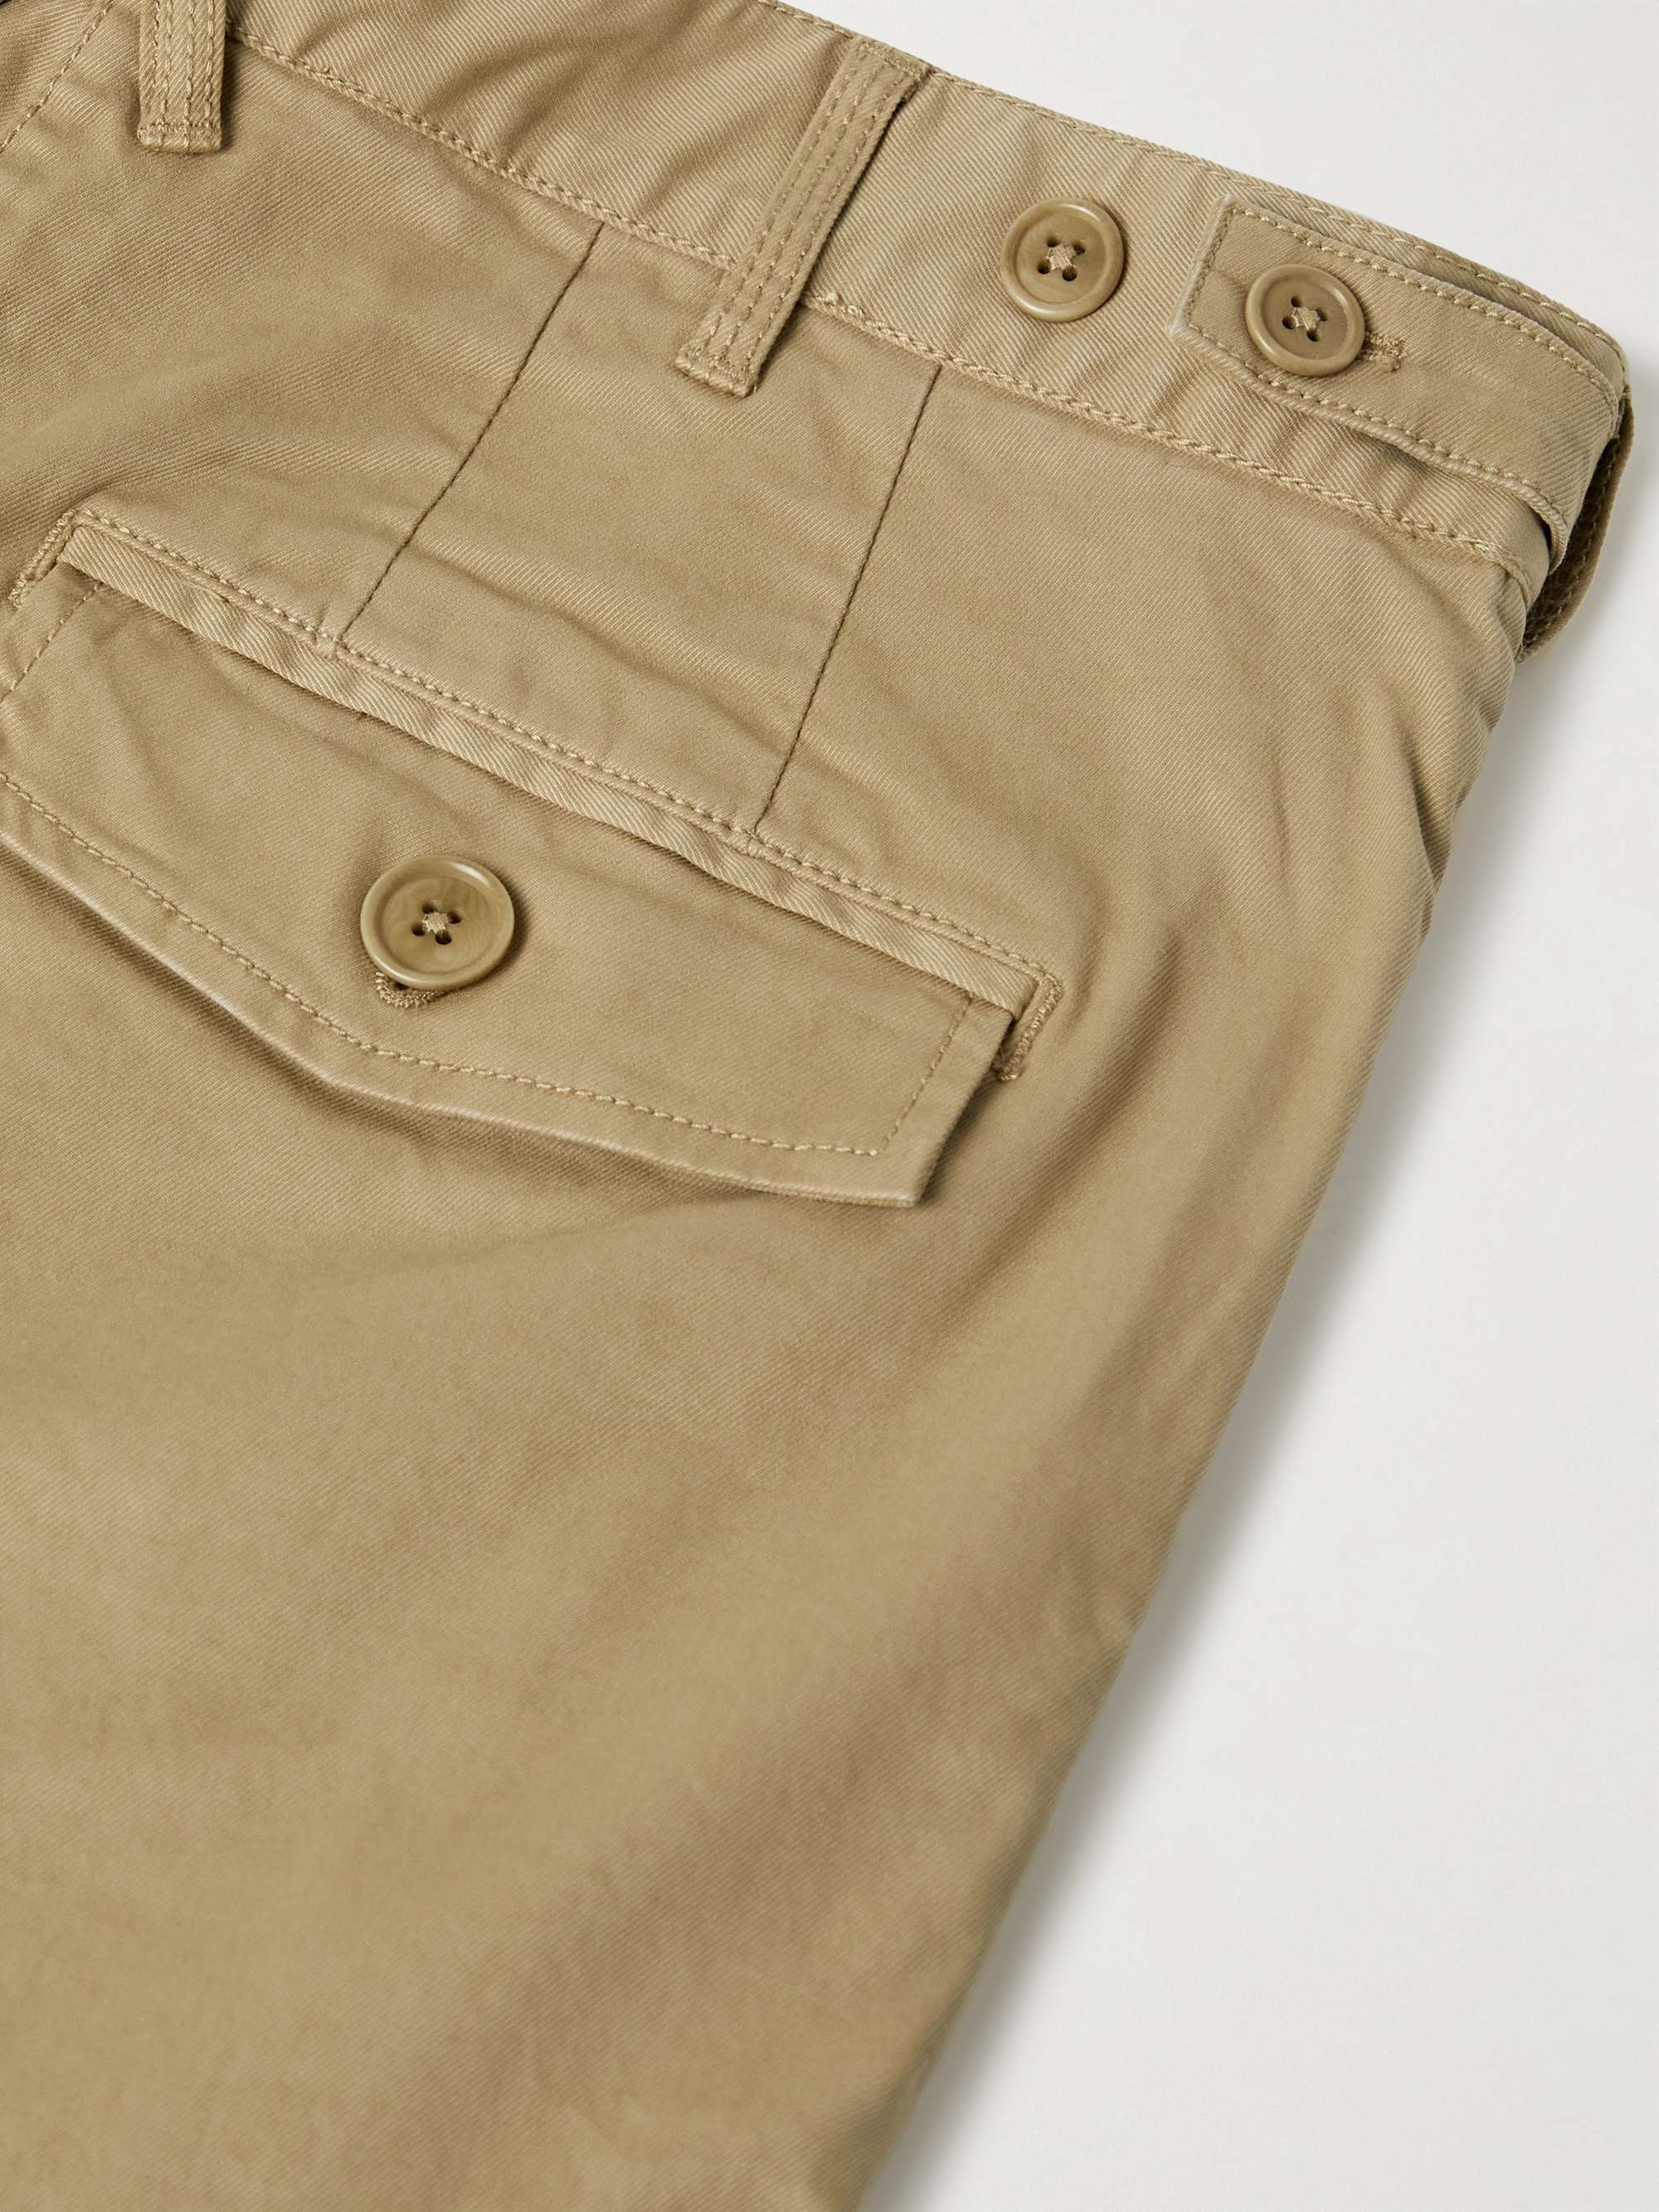 ALEX MILL Tapered Cotton-Blend Twill Chinos